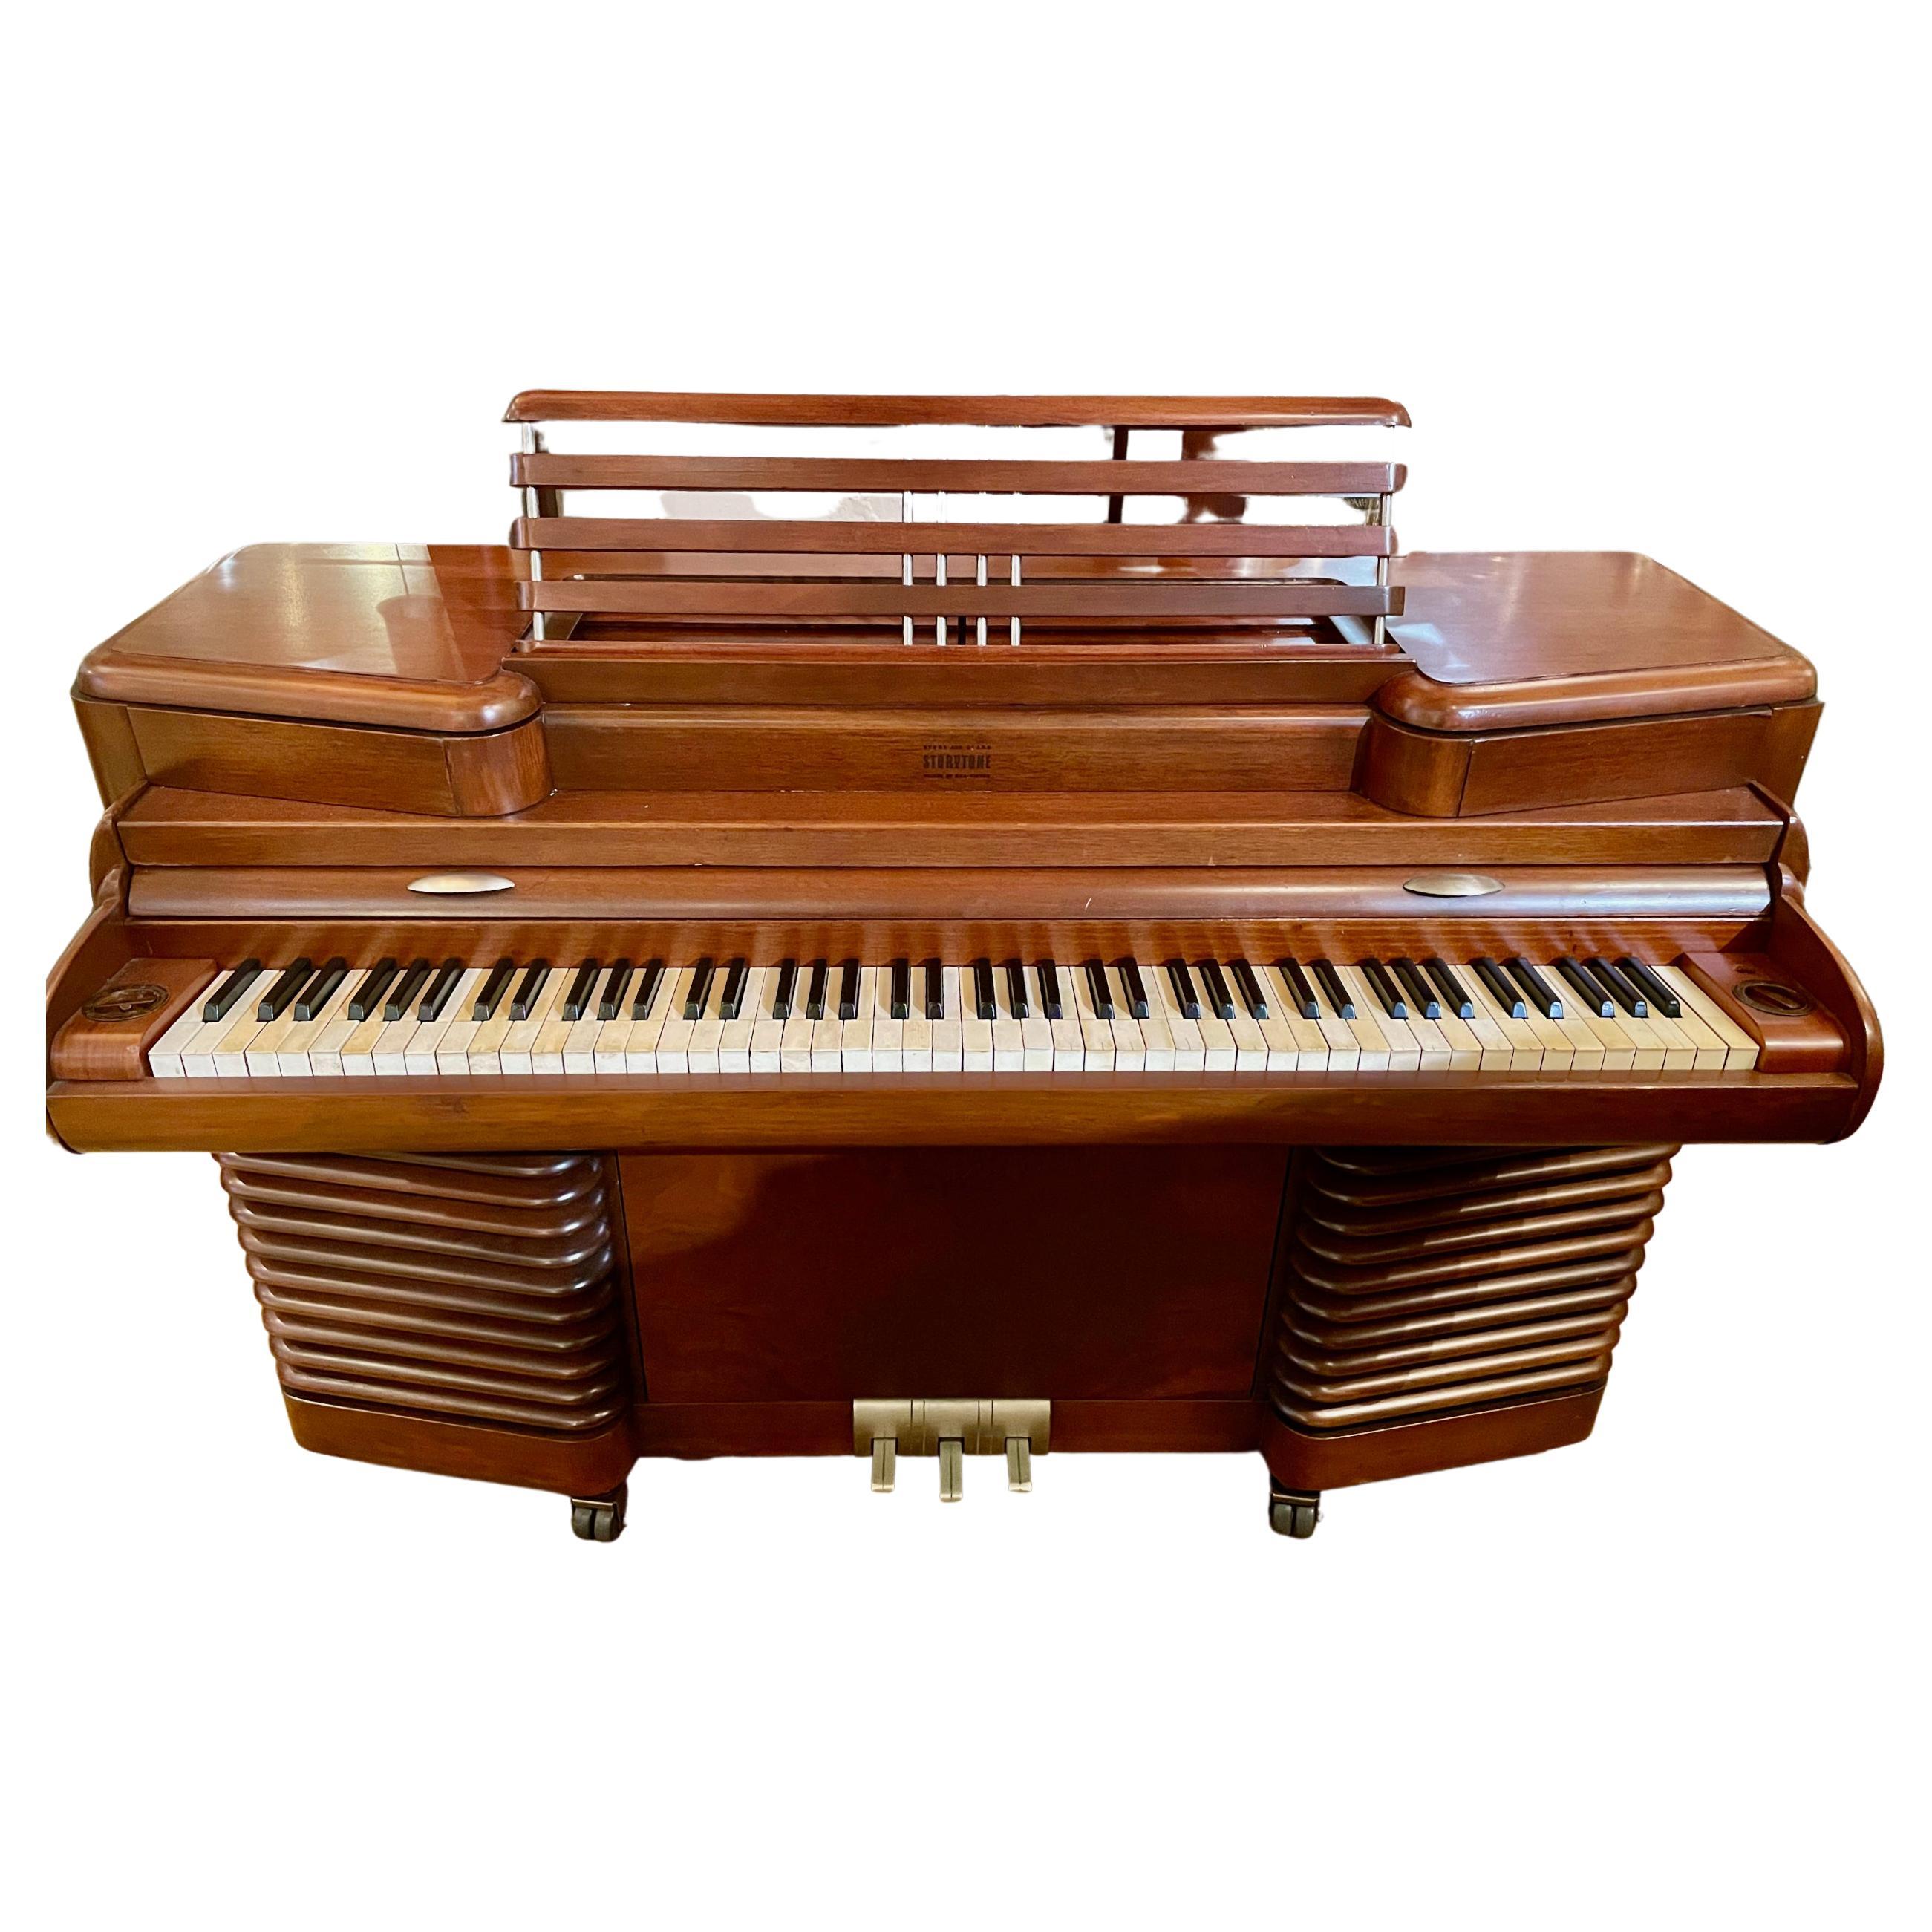 1939 Art Deco Original Story "Storytone" Electric Piano Bench For Sale at